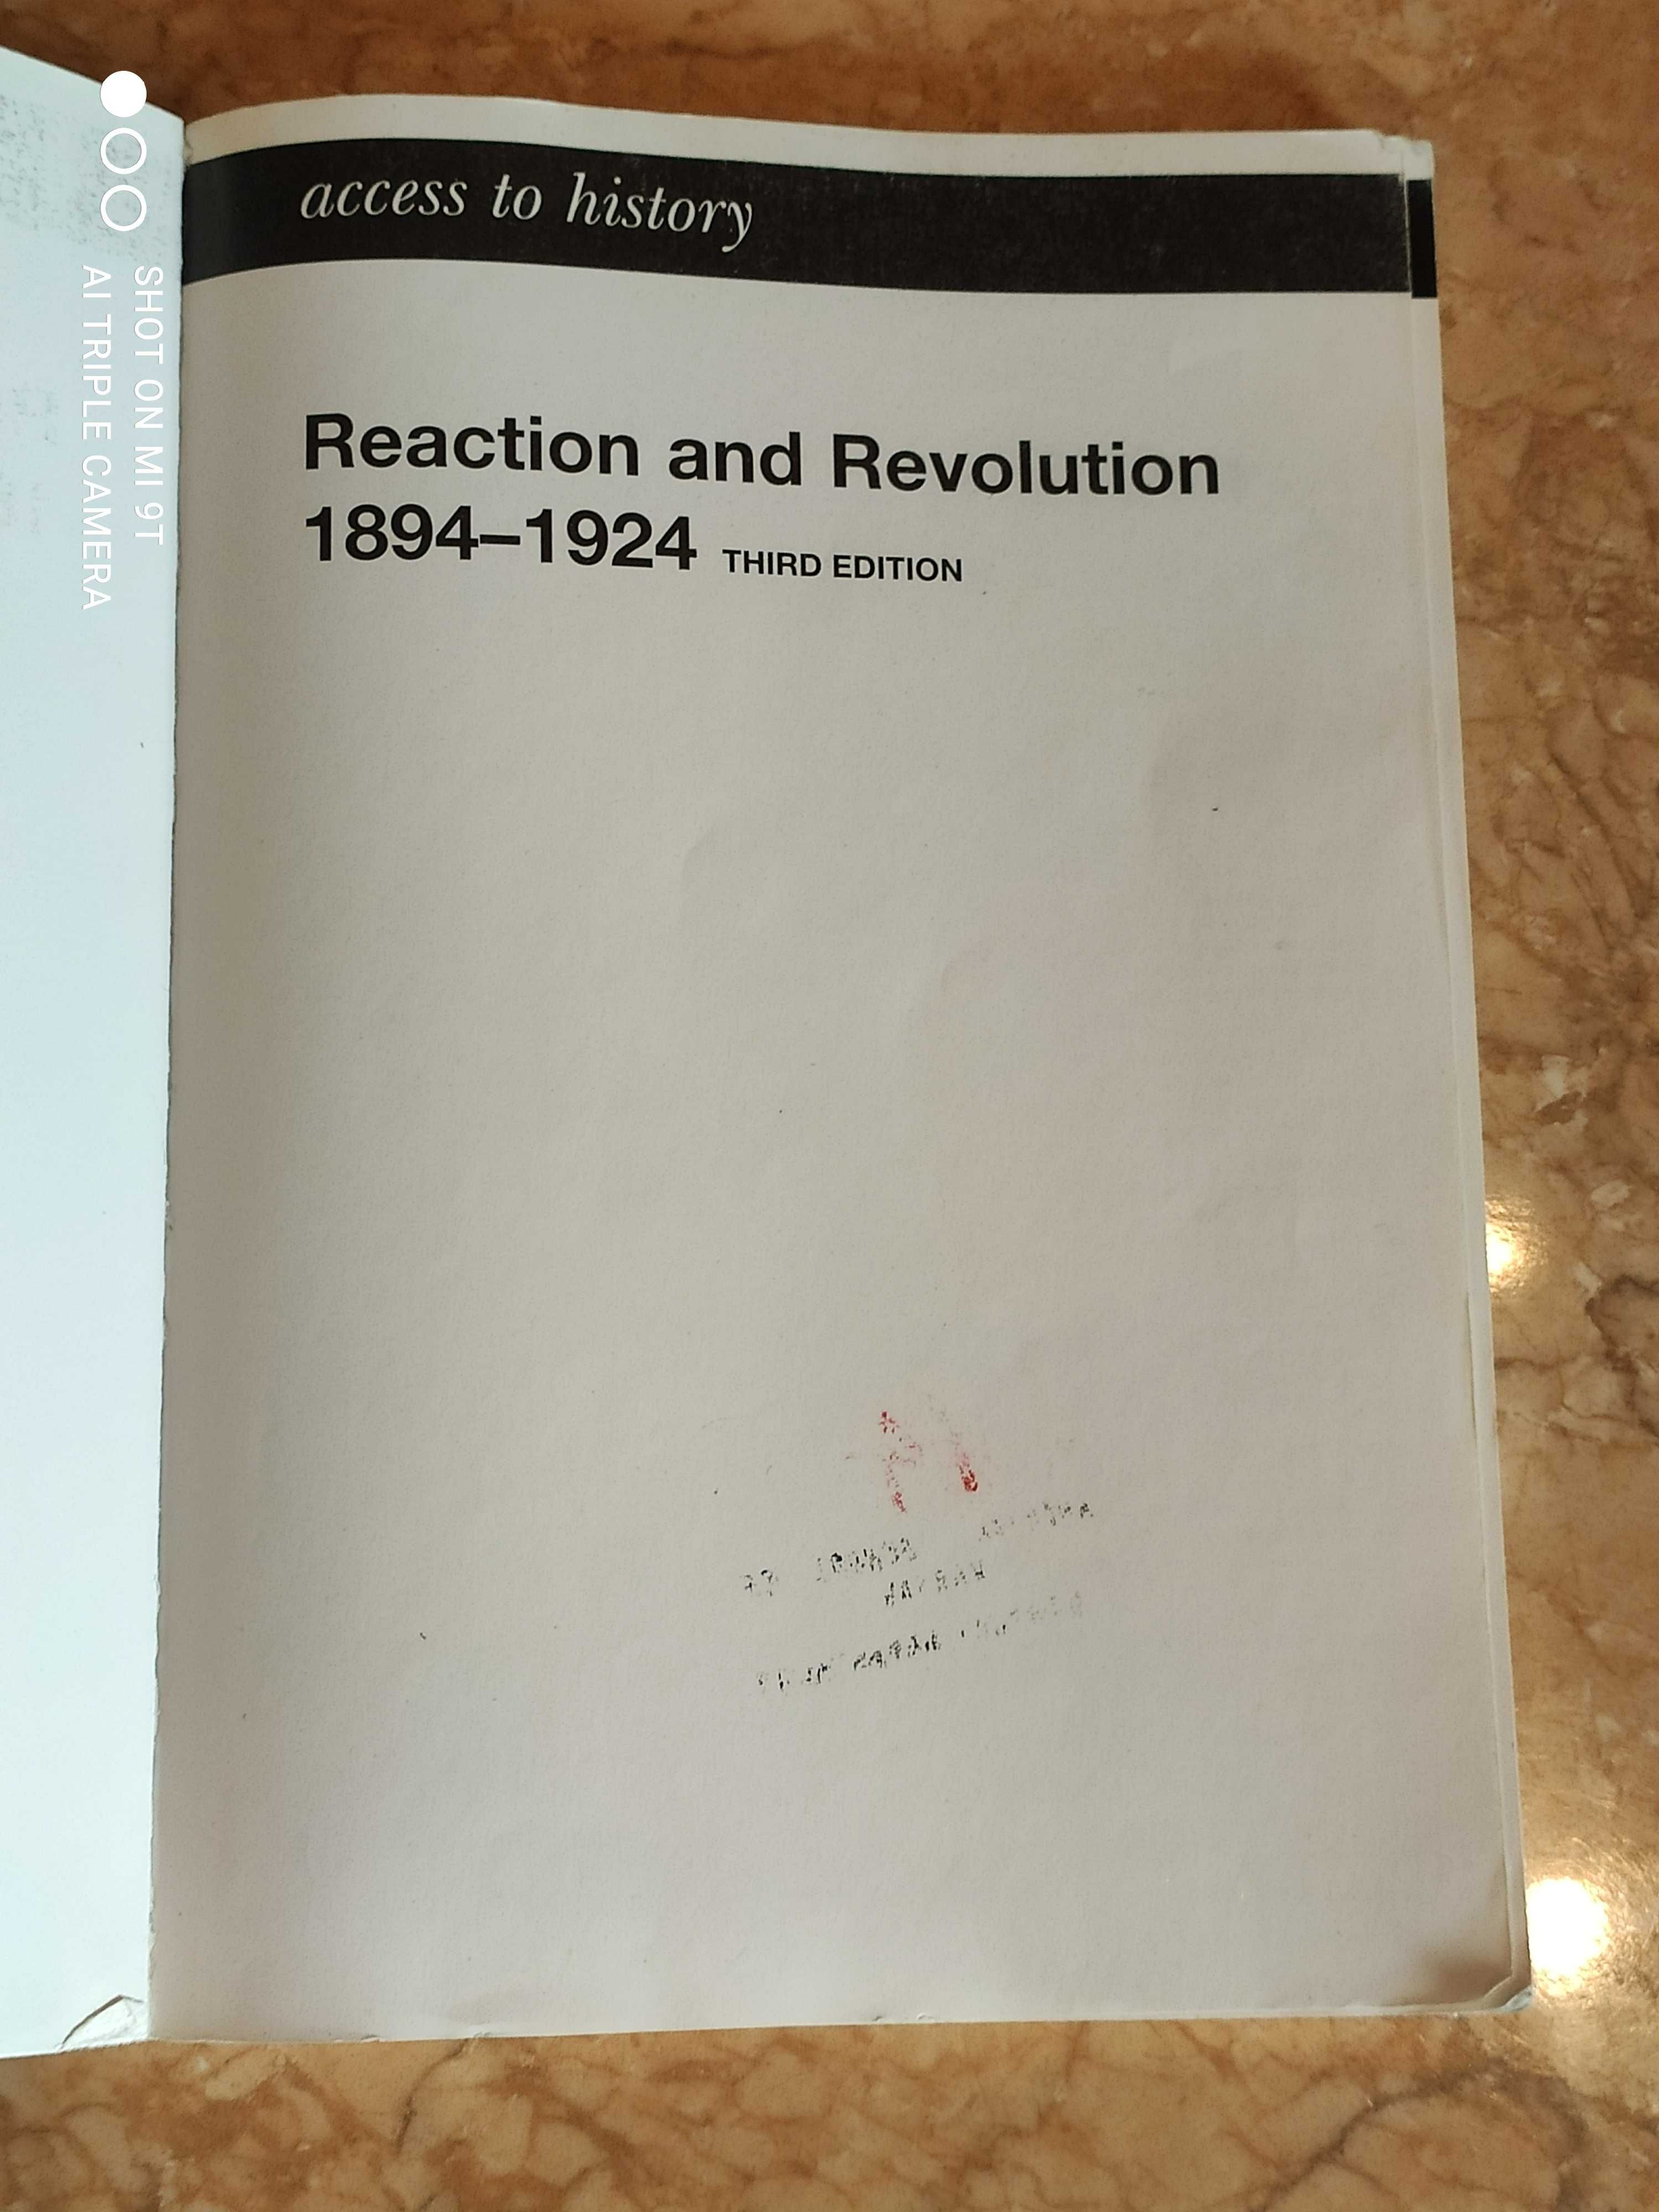 Reaction and Revolution Russia 1894